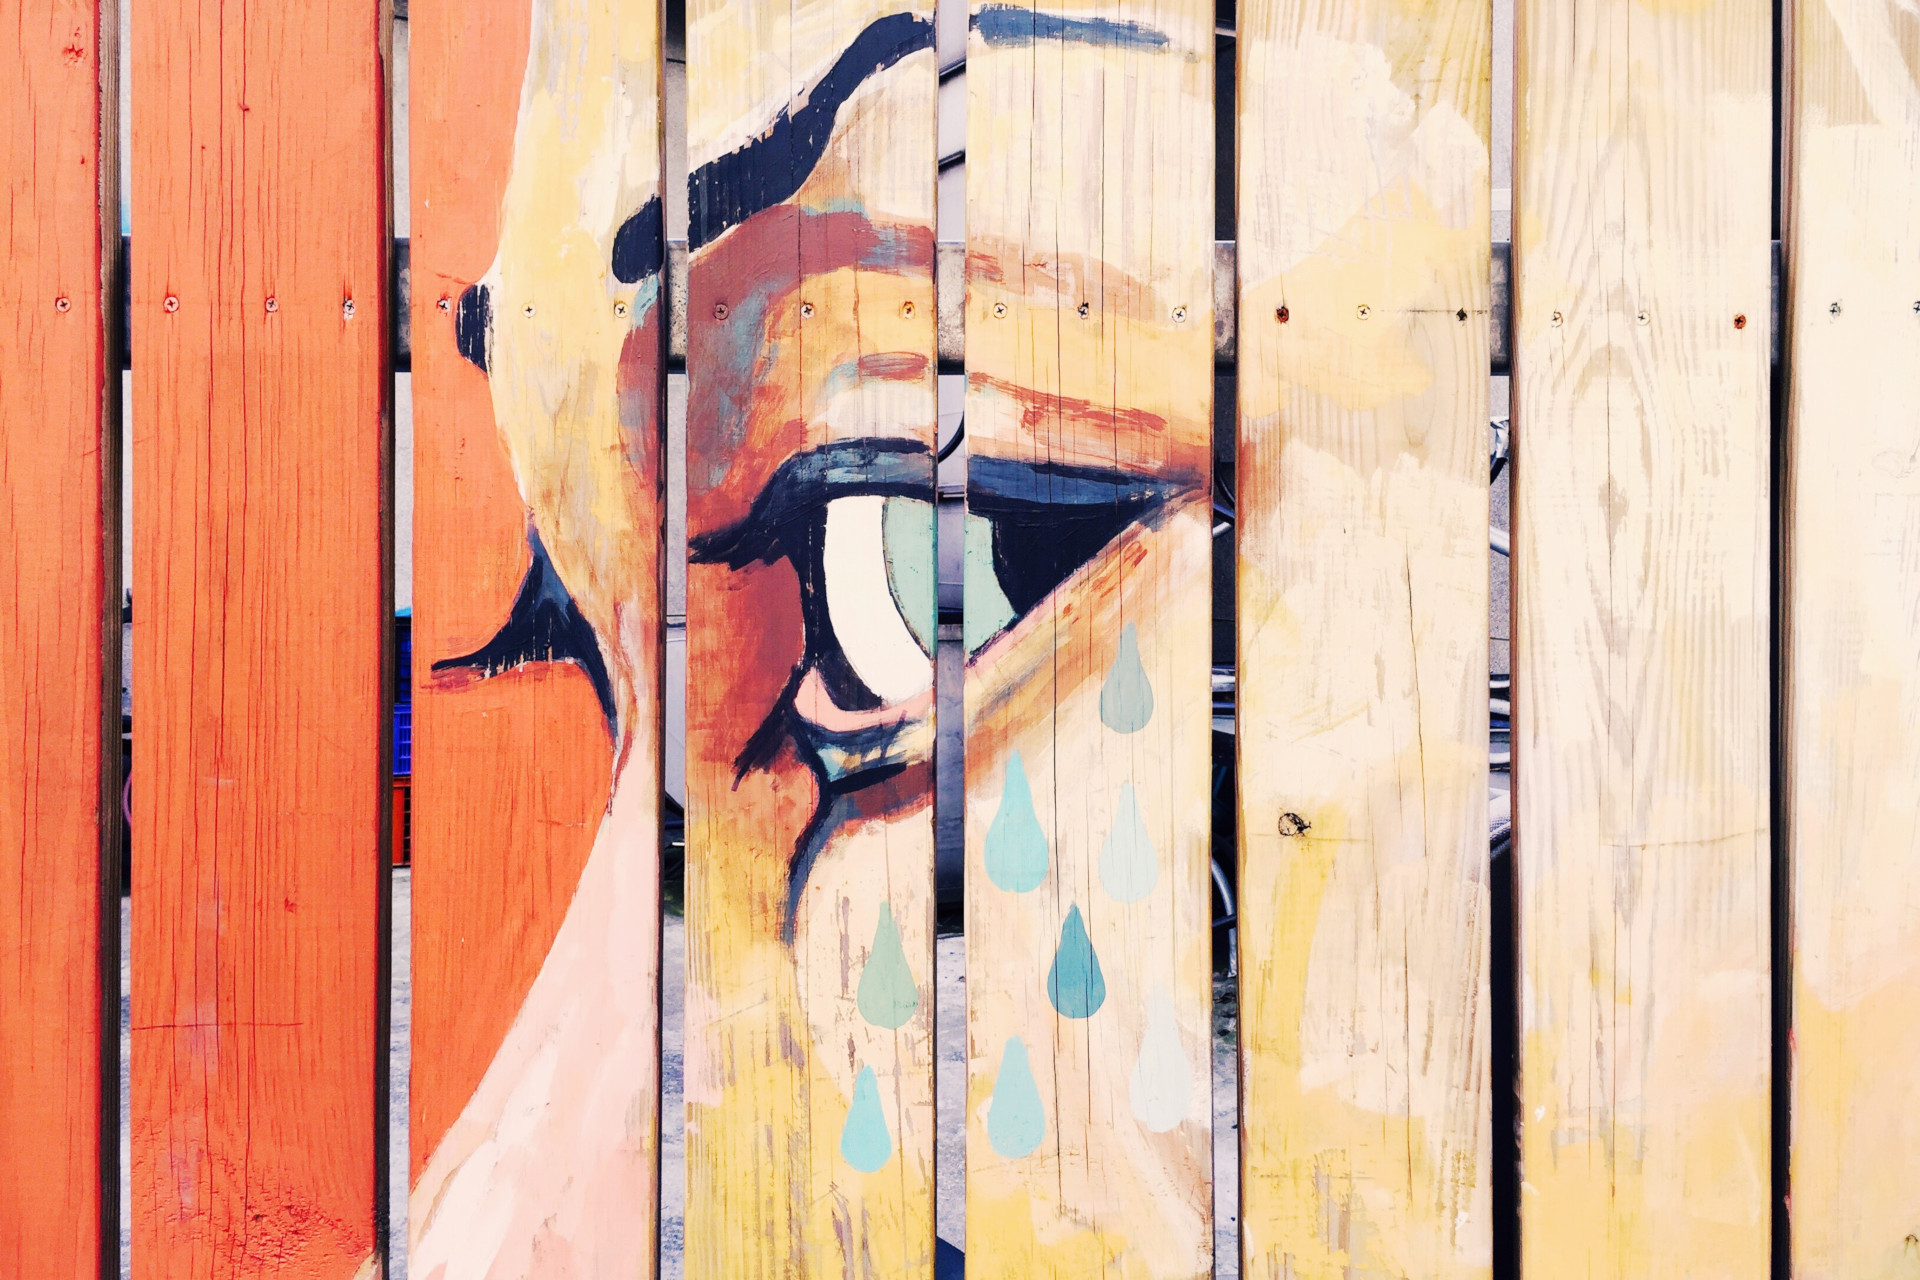 Side of face with tears streaming from eye painted on a fence